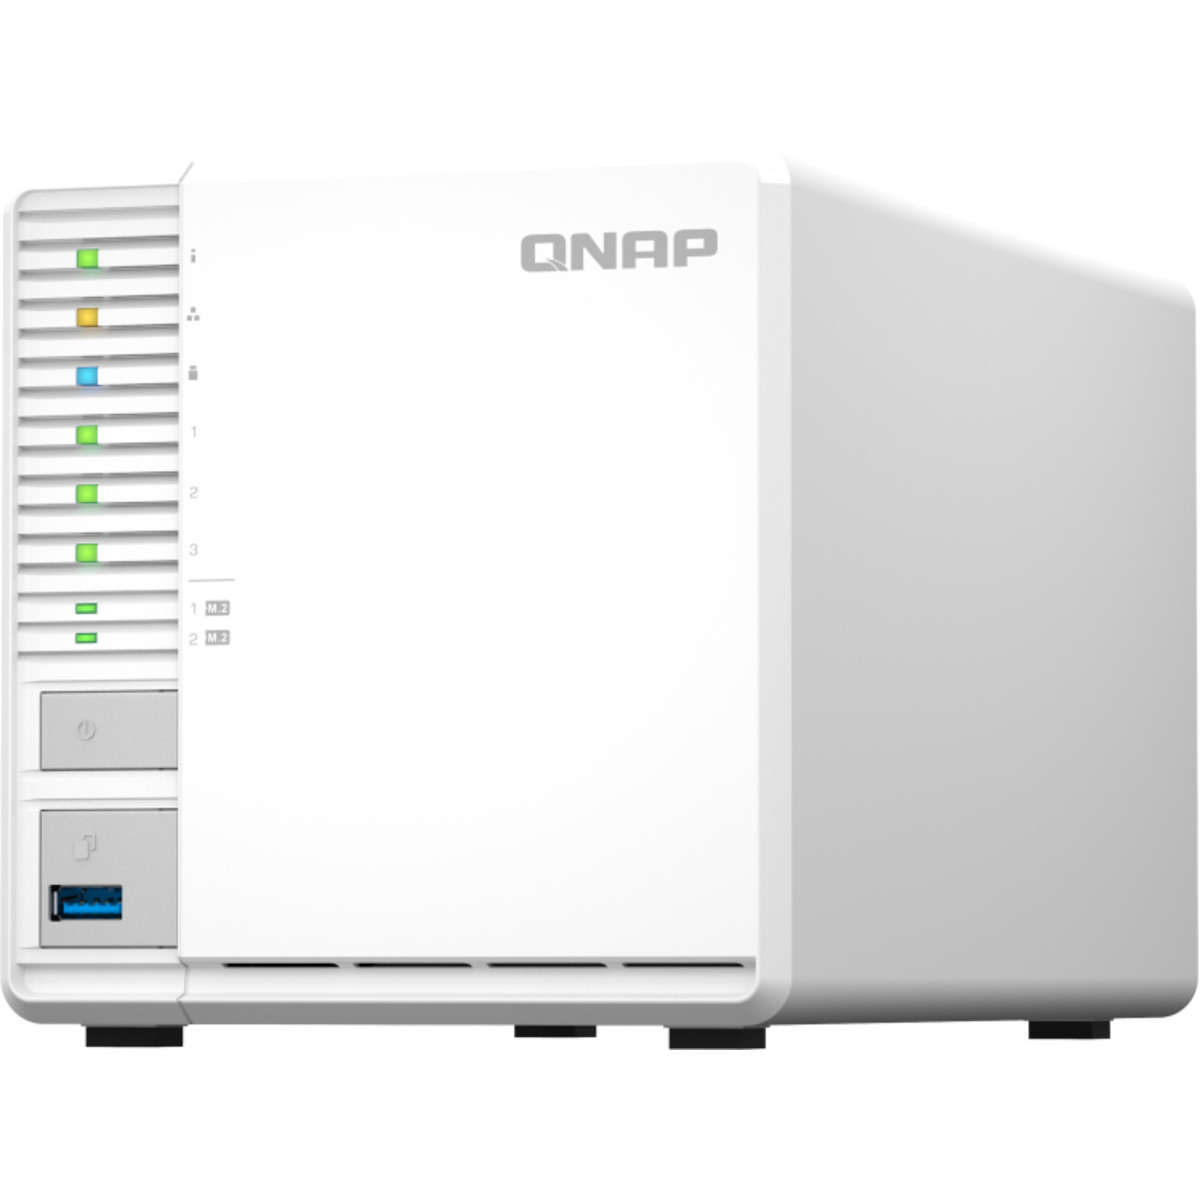 QNAP TS-364 8tb 3-Bay Desktop Multimedia / Power User / Business NAS - Network Attached Storage Device 2x4tb Seagate IronWolf ST4000VN006 3.5 5400rpm SATA 6Gb/s HDD NAS Class Drives Installed - Burn-In Tested TS-364